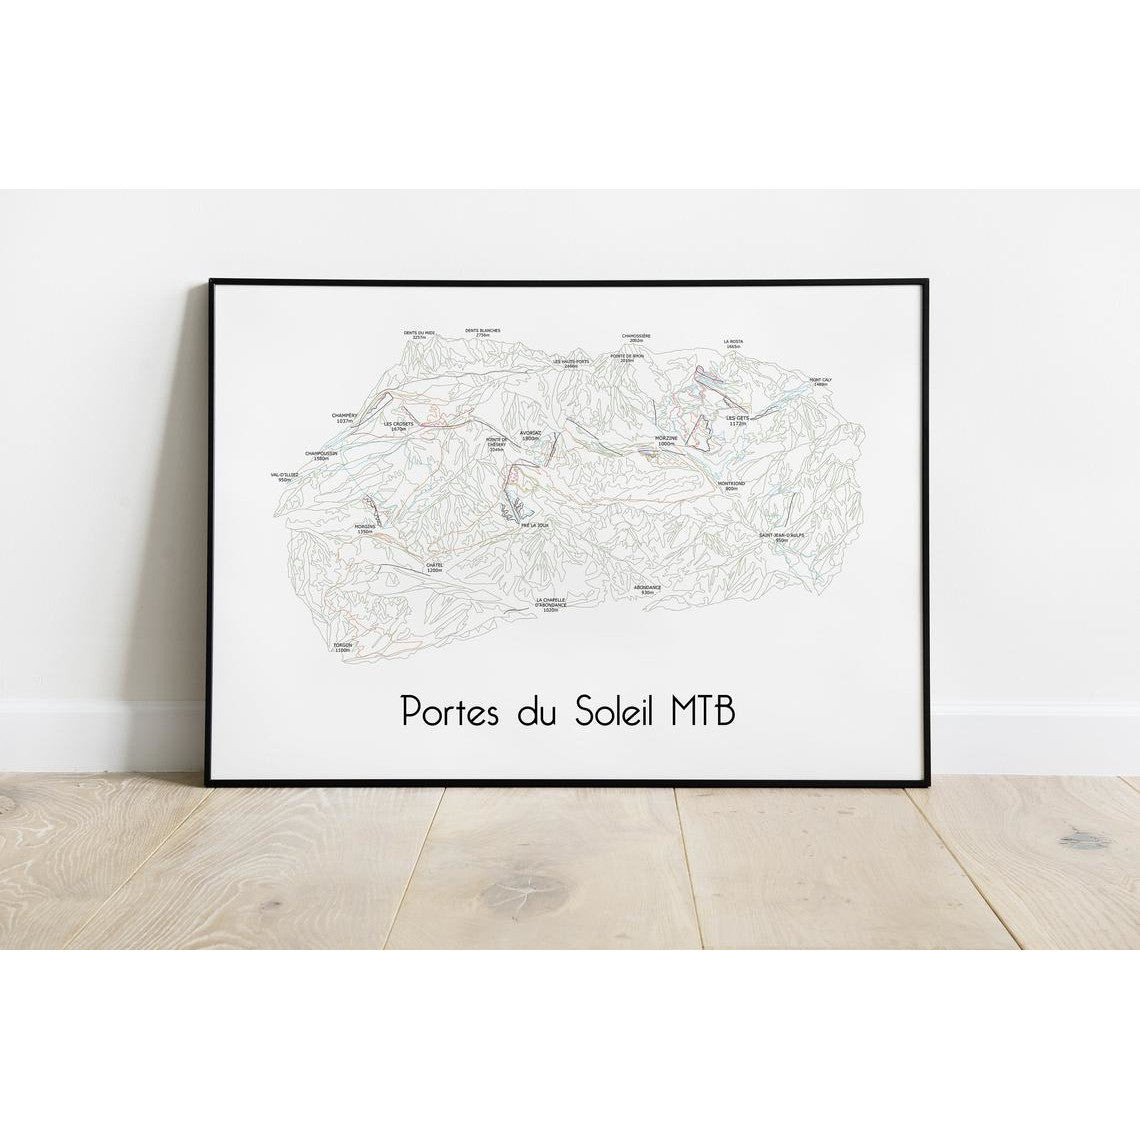 Portes du Soleil Mountain Bike Trails Map Wall Print Poster | Backcountry Books | Bluebell and Moss